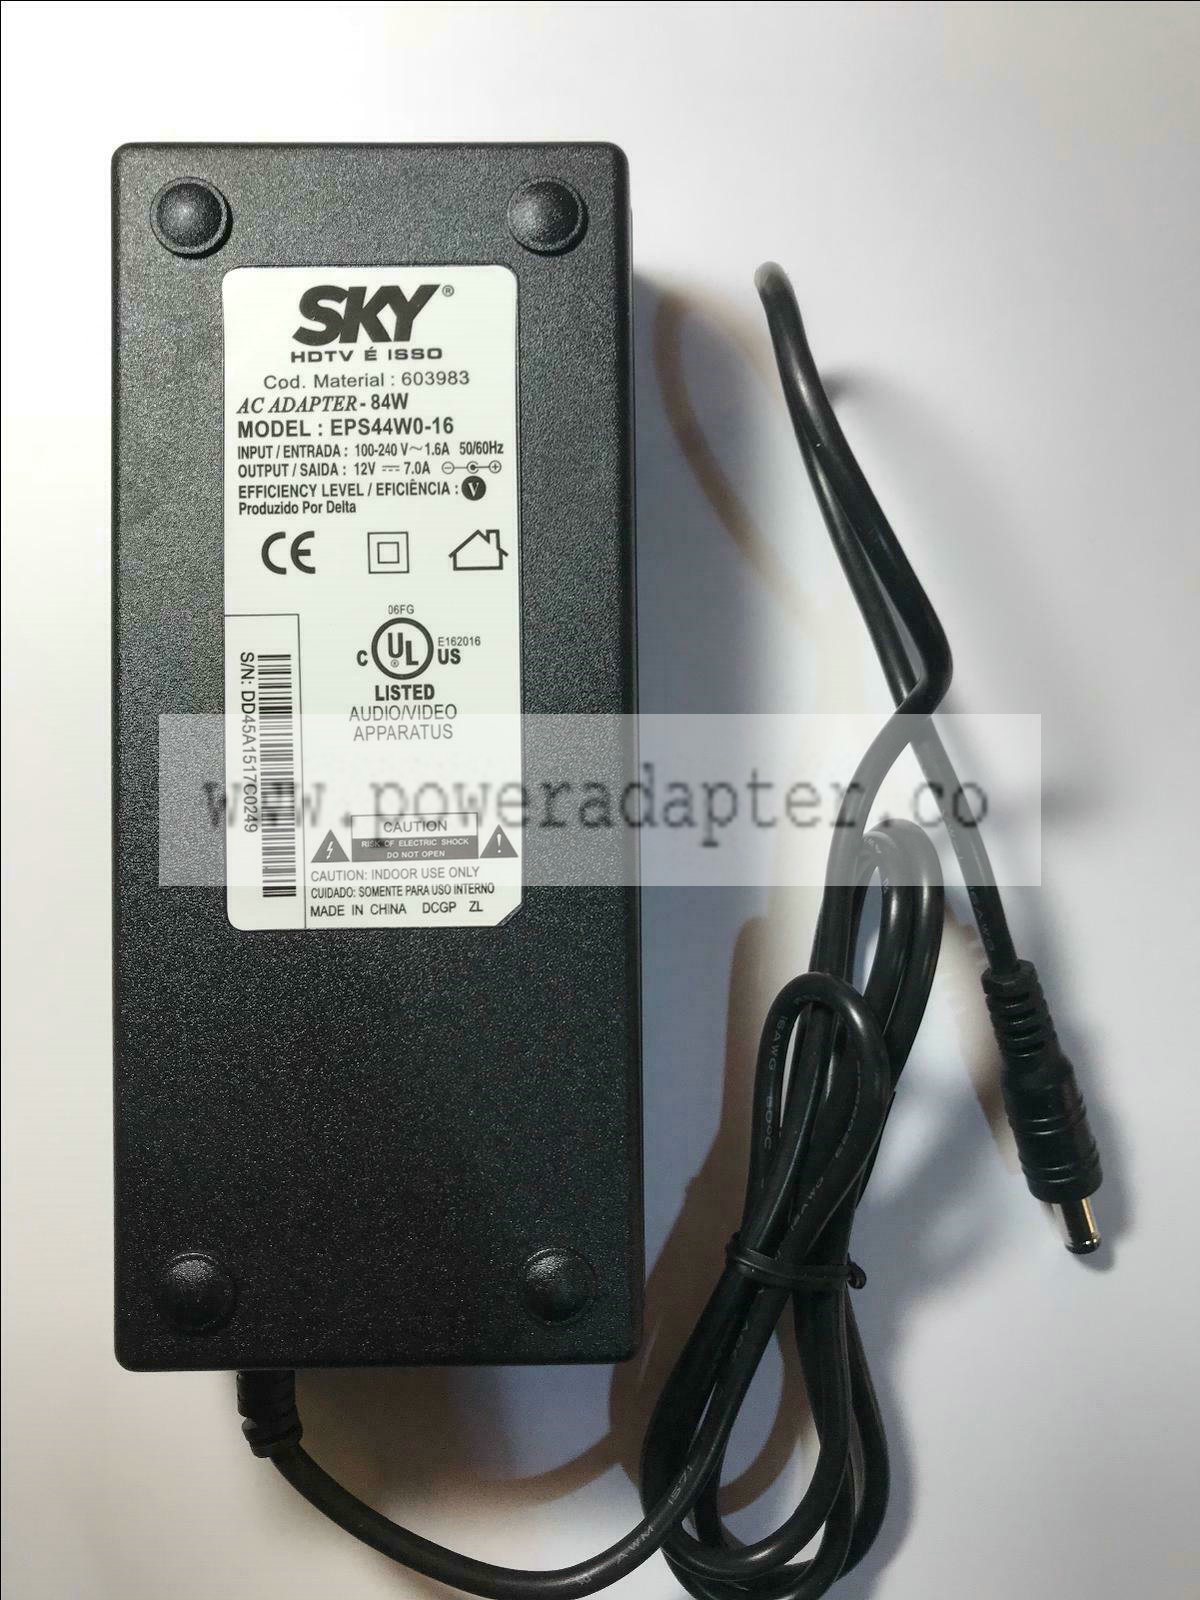 Goodmans LD1547D LCD TV Replacement 12V Mains 5A Power Supply Adaptor UK Manufacturer warranty: 1 year MPN: BAYE2-12